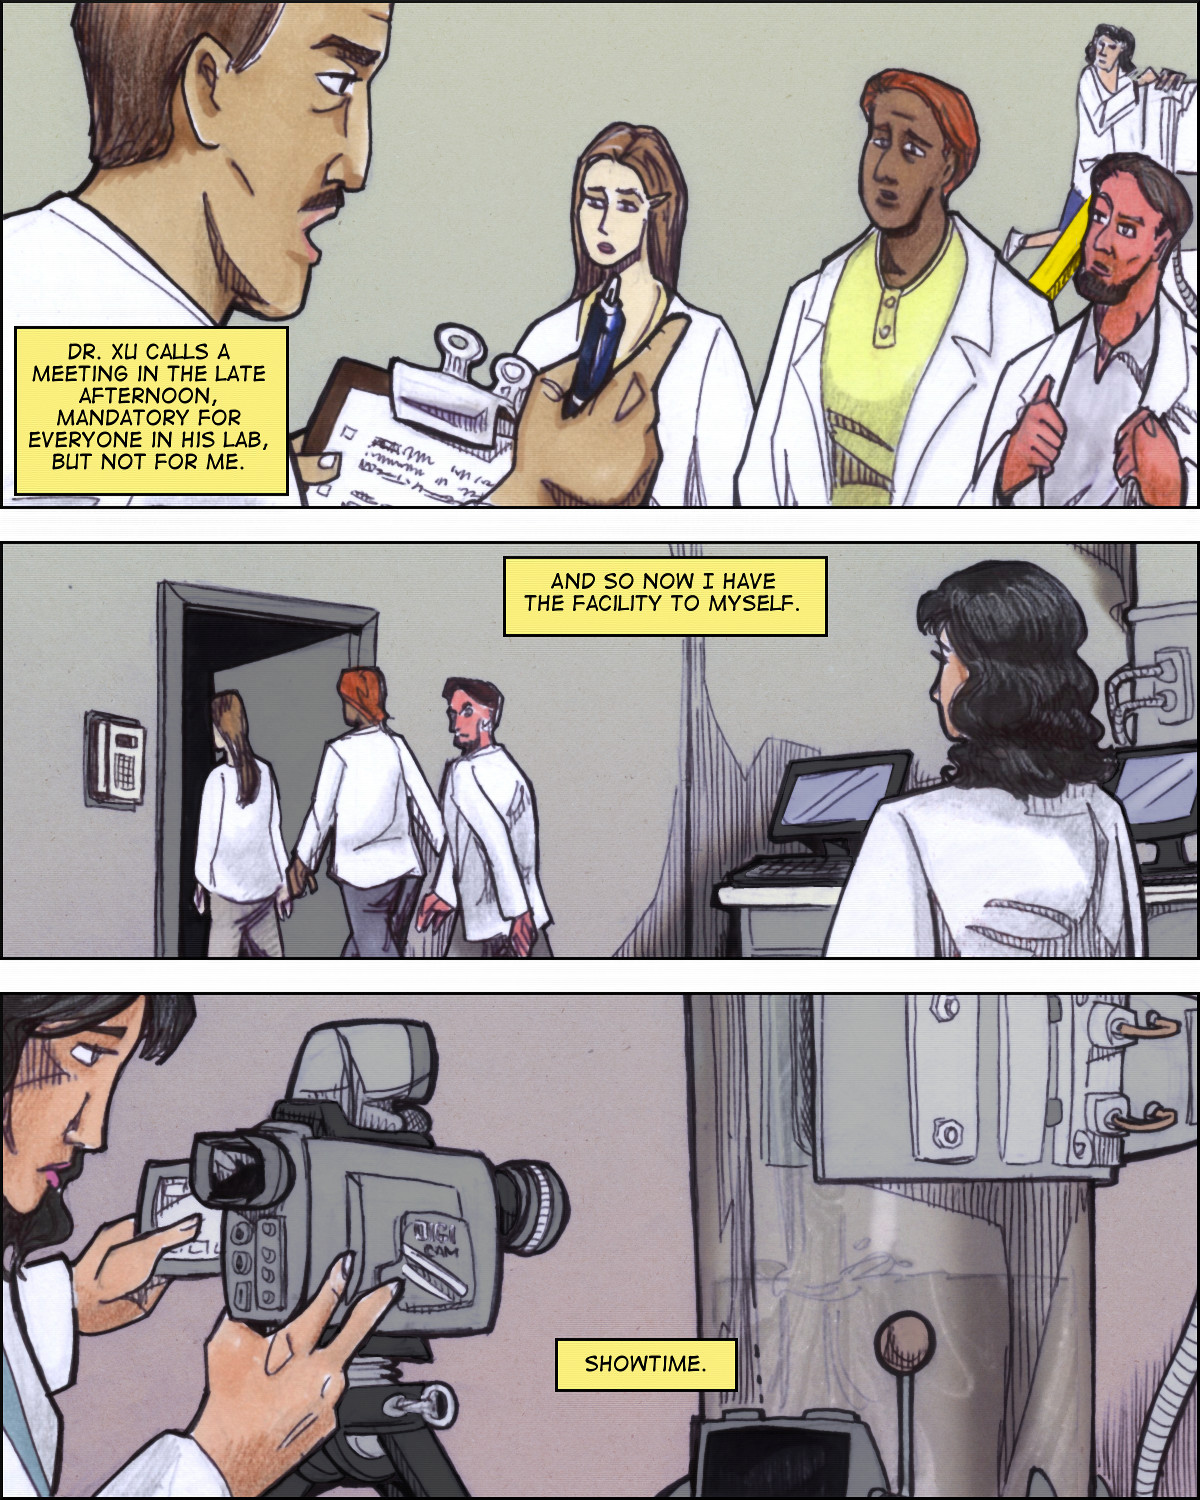 Hope is 'unwisely' left alone in the lab.